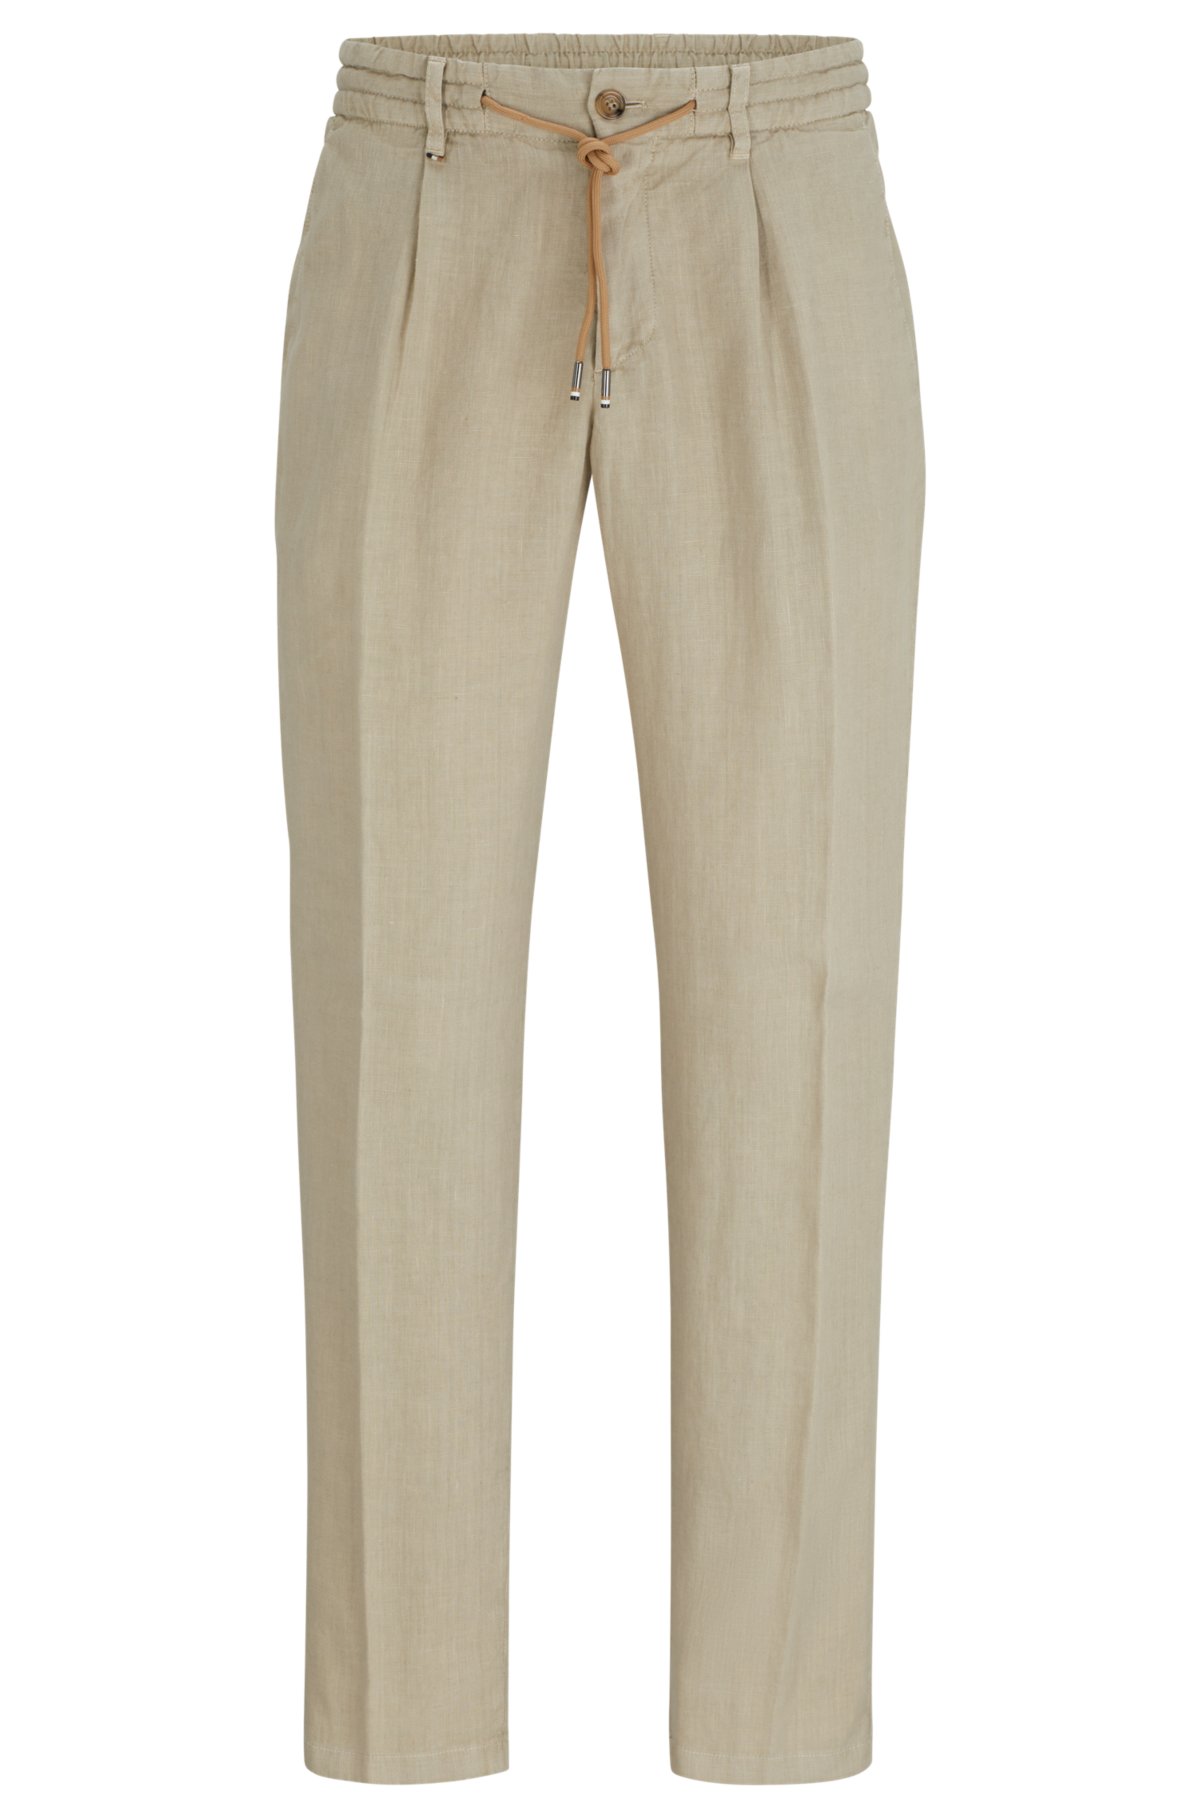 BOSS - Slim-fit trousers in linen with tie waist